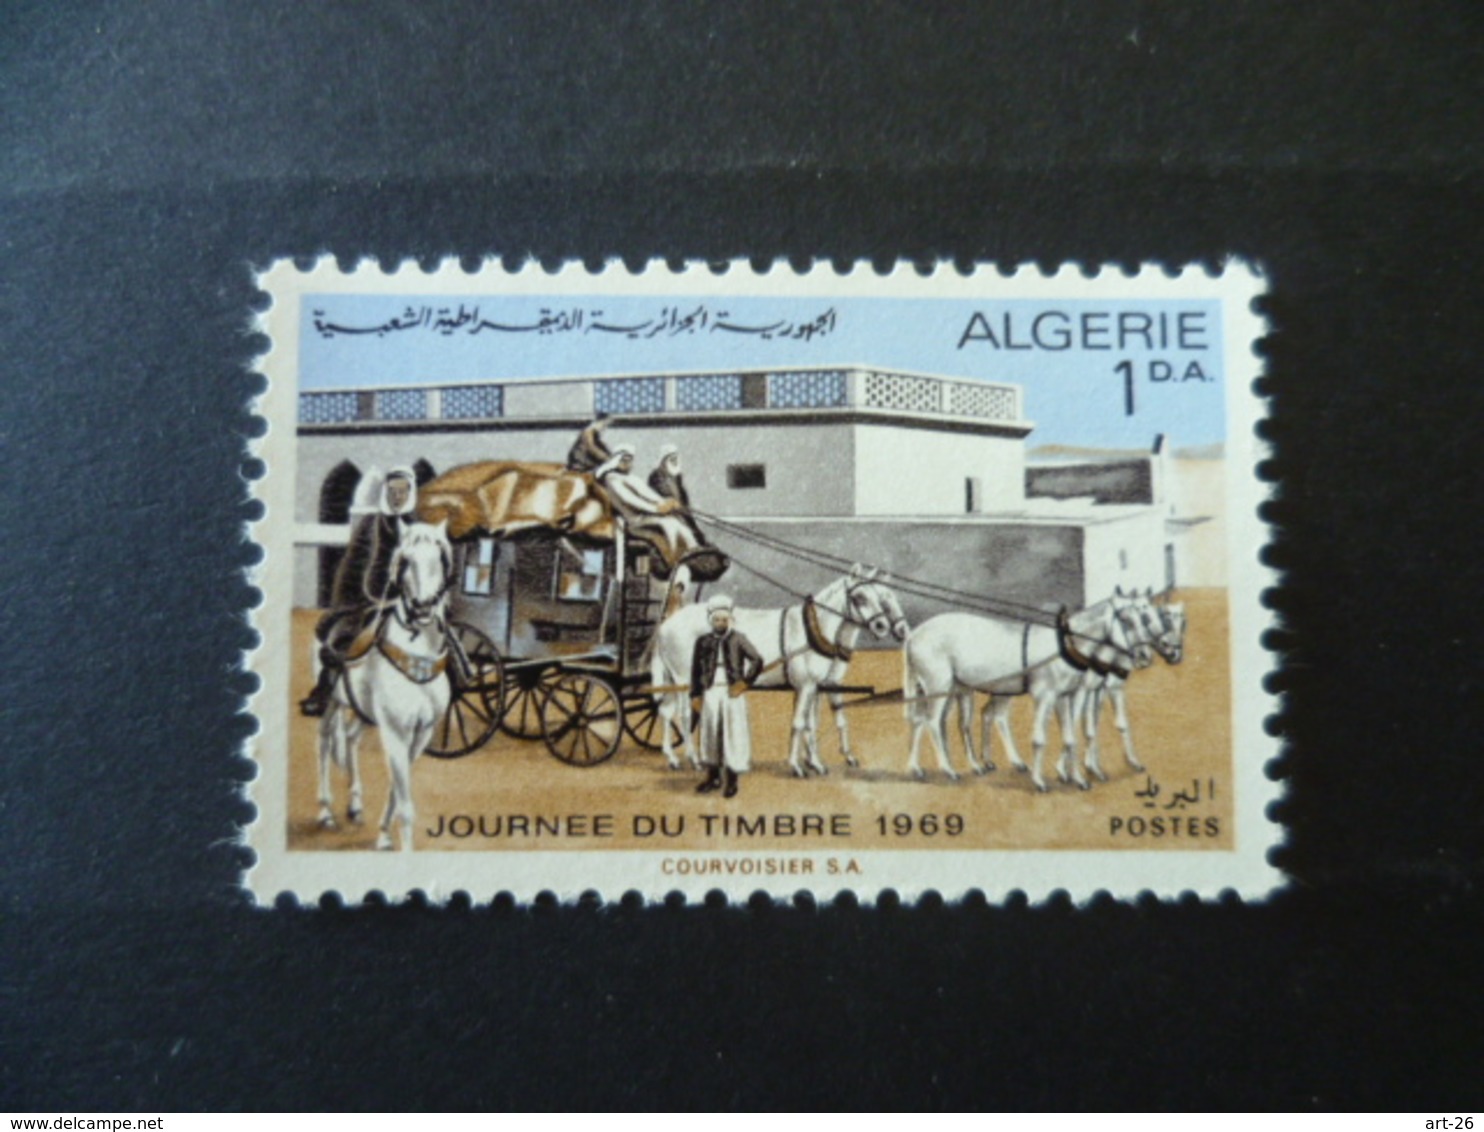 TIMBRE ALGERIE N° 490 JOURNEE DU TIMBRE 1969 DILIGENCE  CHEVAL NEUF **  MNH - Algeria (1962-...)